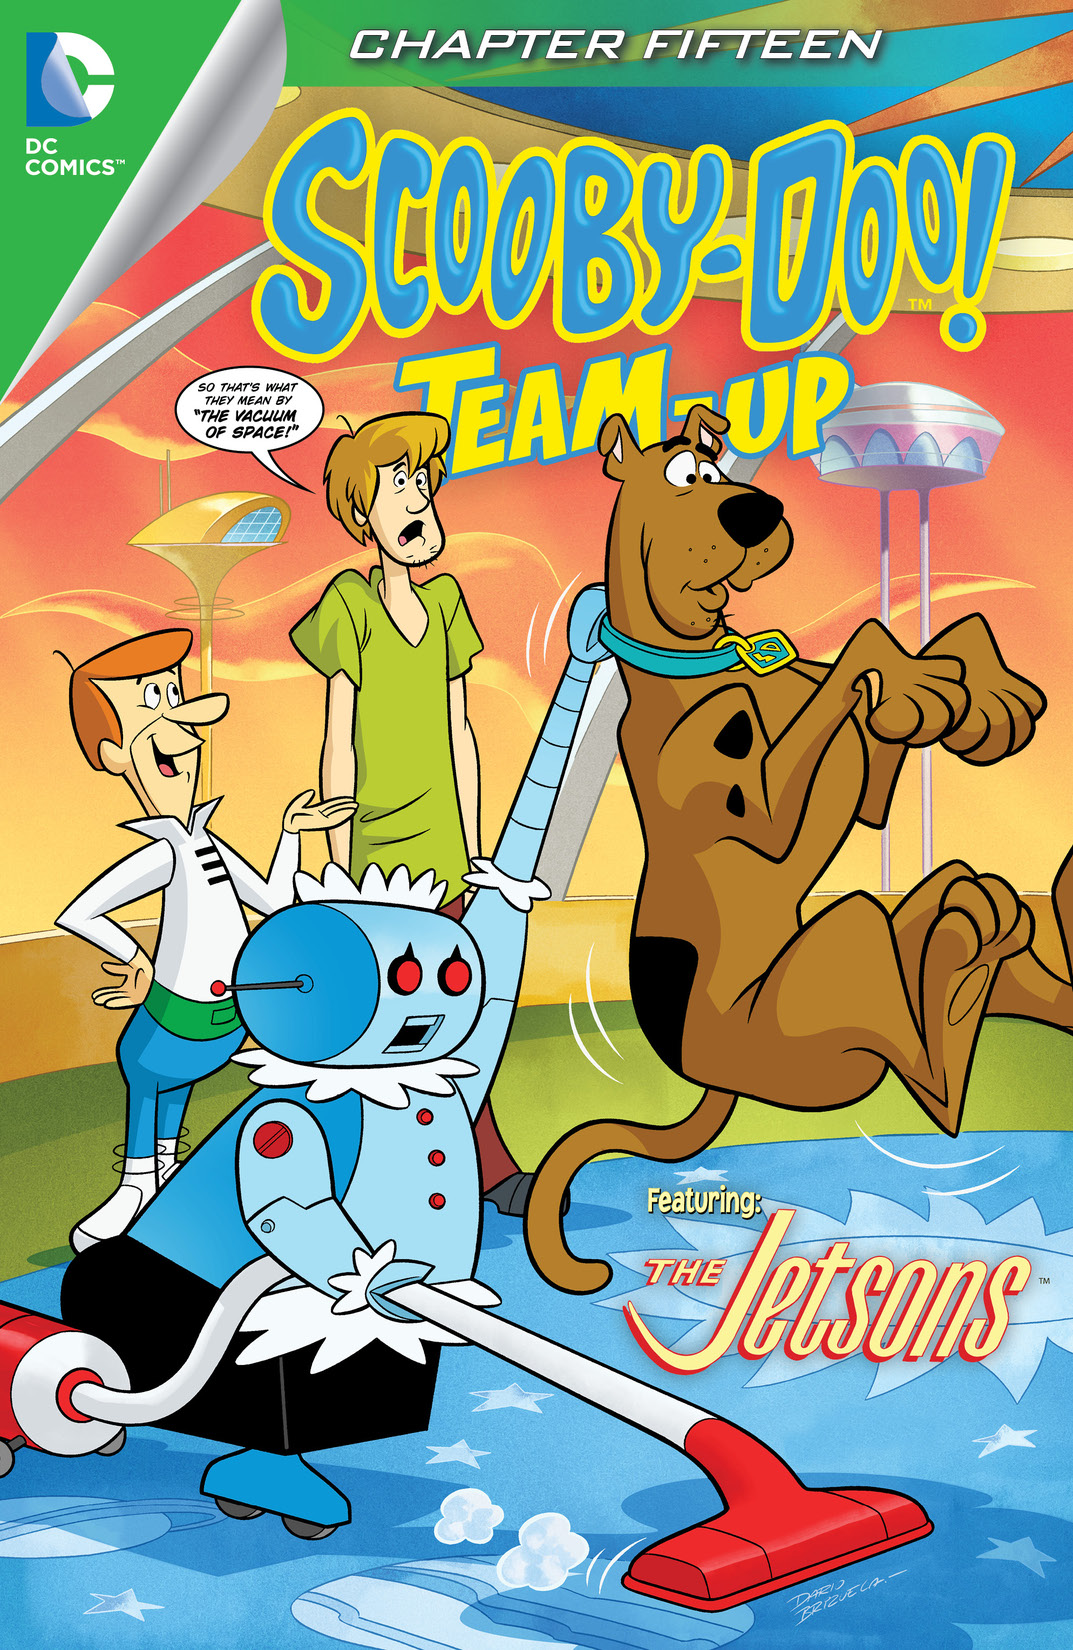 Scooby-Doo Team-Up #15 preview images